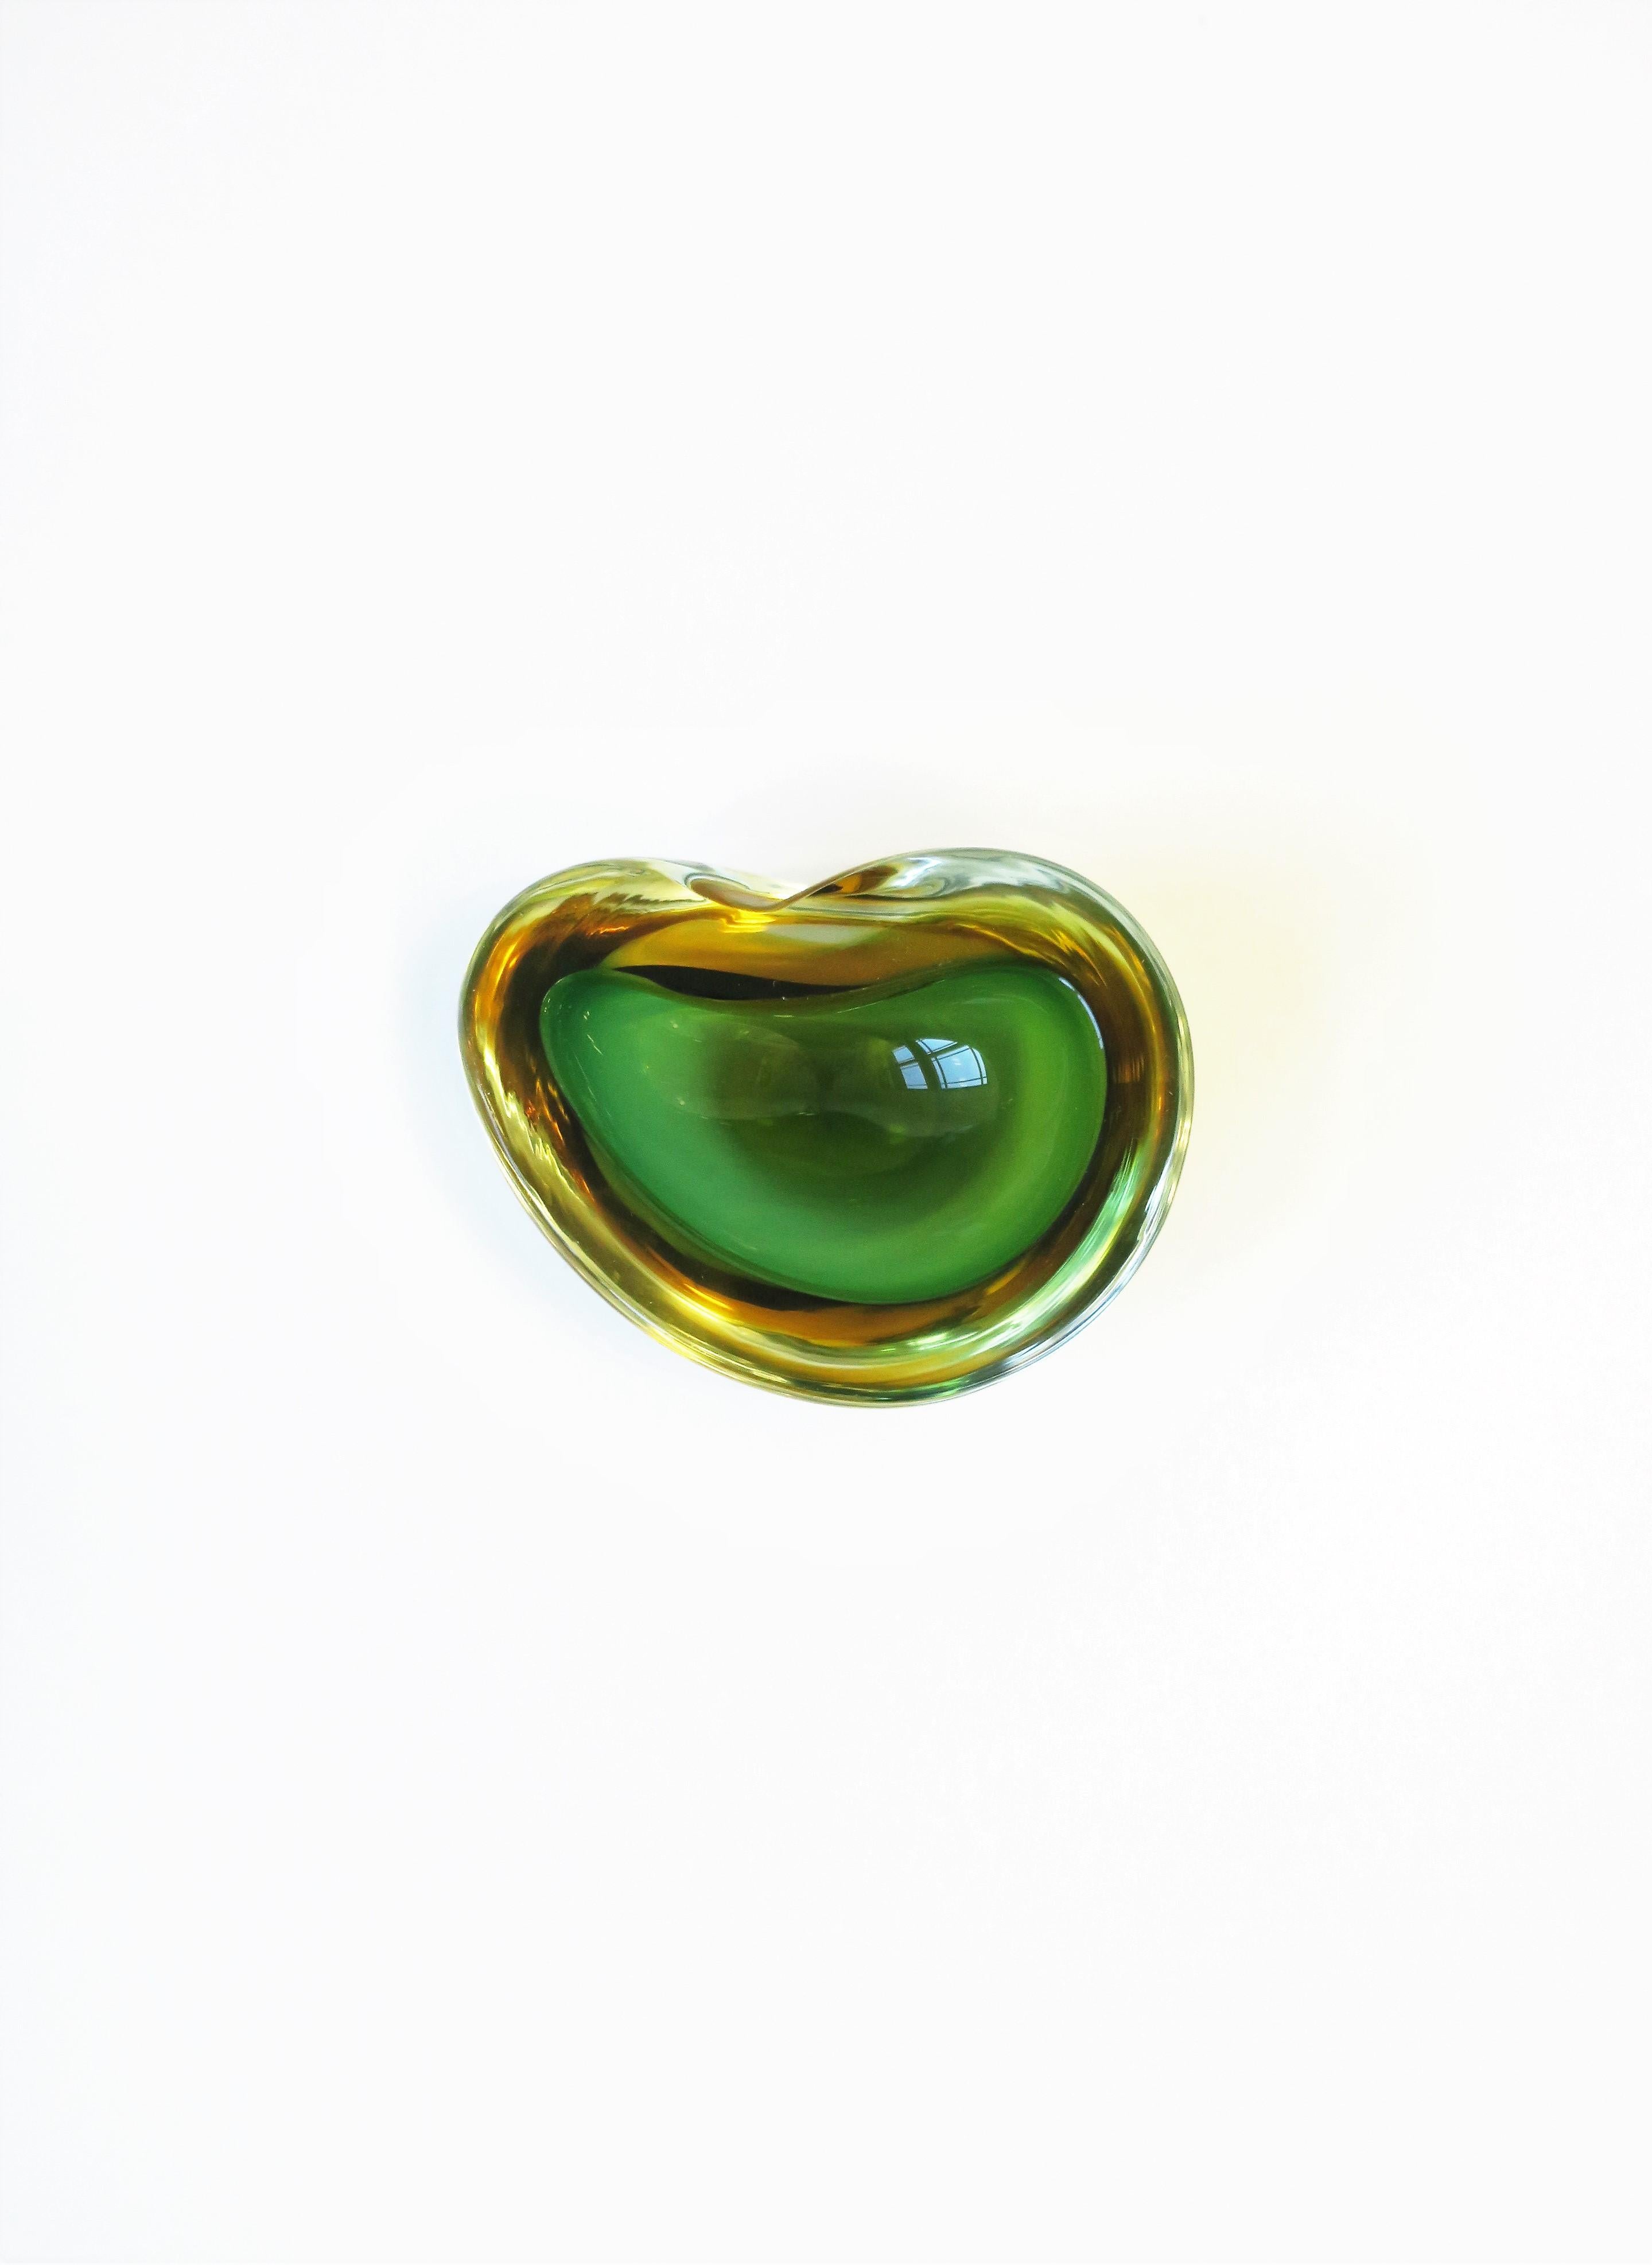 An Italian Murano emerald green and yellow art glass bowl in an organic modern form (a modern oyster seashell shape), circa mid-20th century, Italy. Great as a standalone piece and perfect for a side or drinks table for nuts, etc. Or, as a small